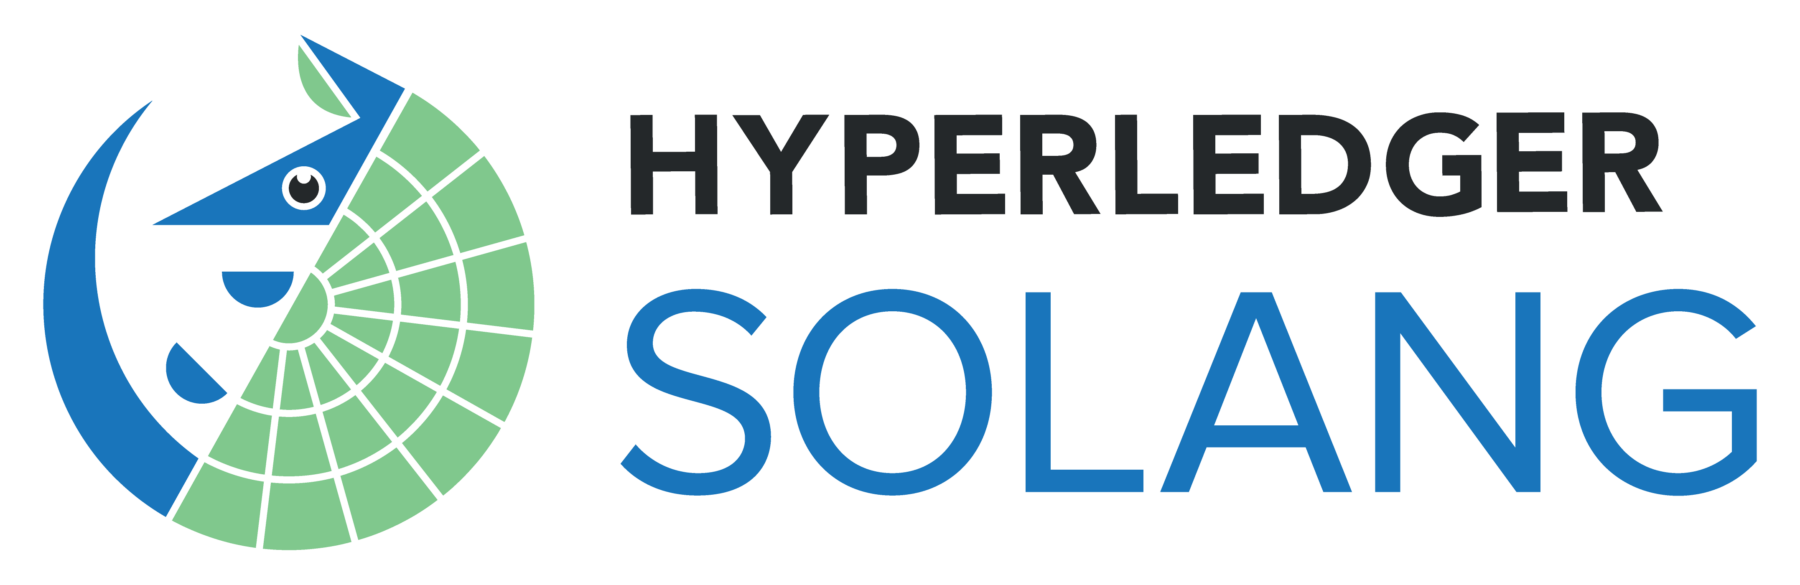 Hyperledger Solang Release v0.2.0 and what’s to come